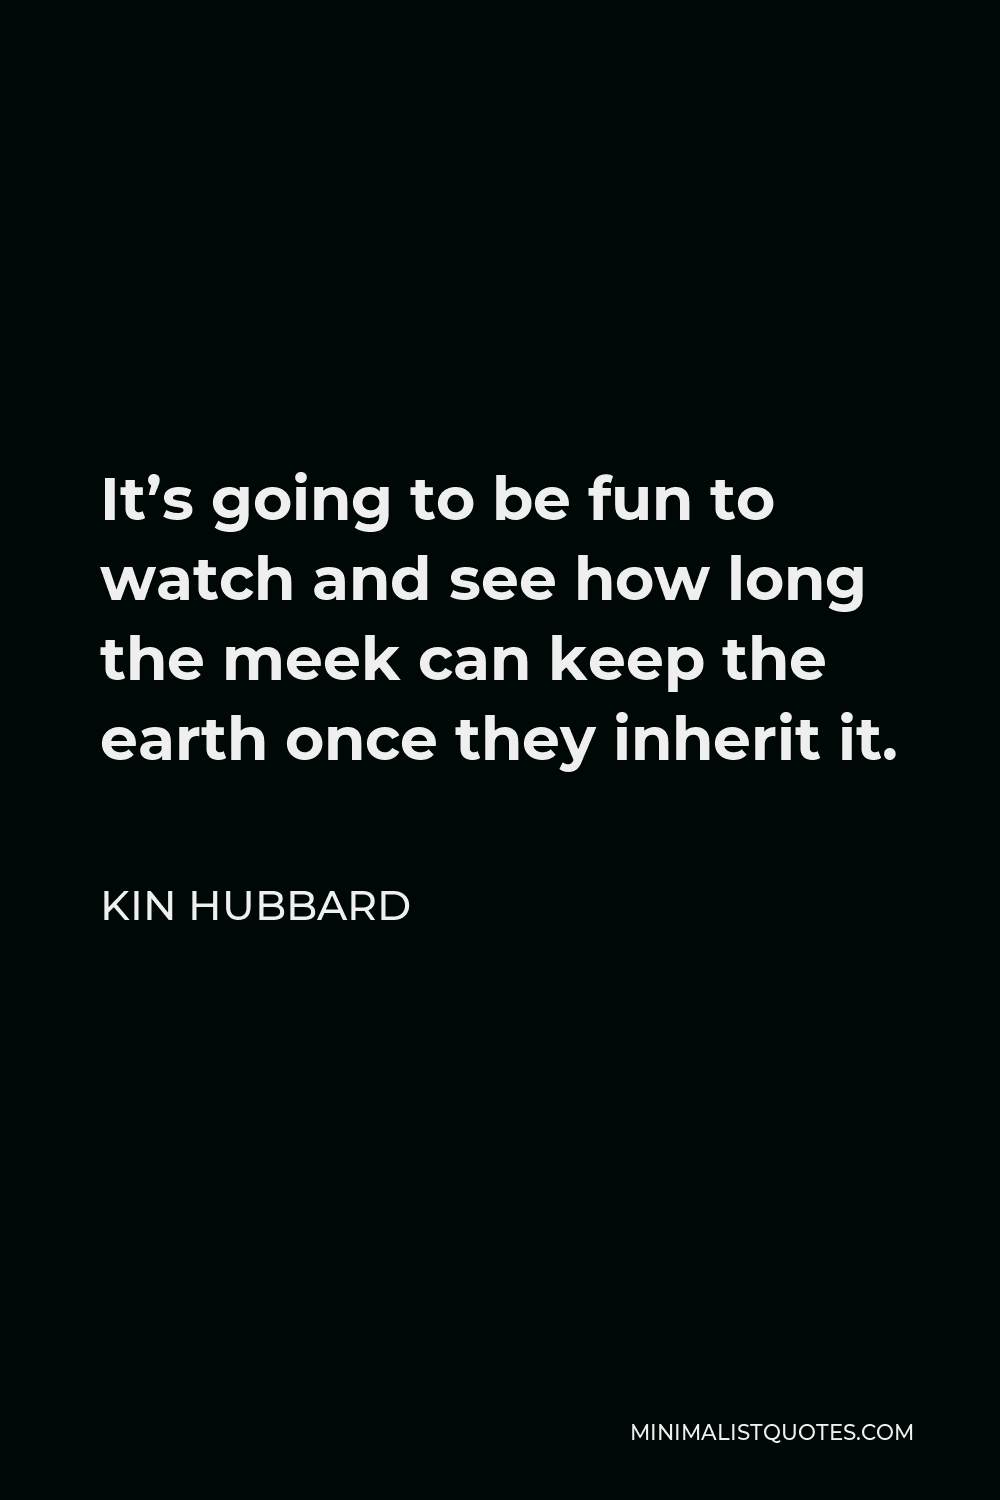 Kin Hubbard Quote - It’s going to be fun to watch and see how long the meek can keep the earth once they inherit it.